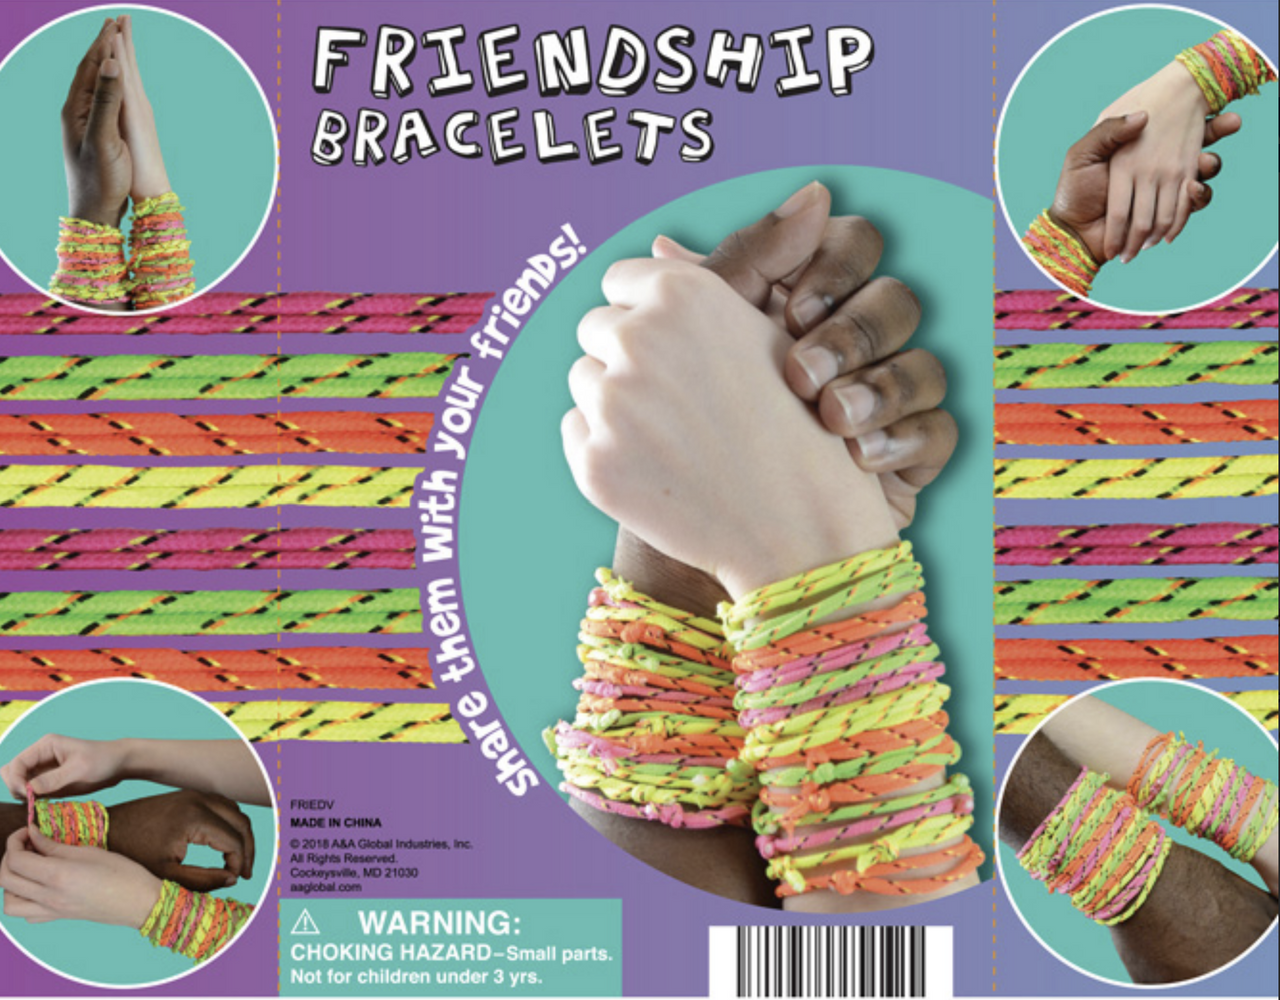 Make Friendship Bracelets to Share With Your Friends!